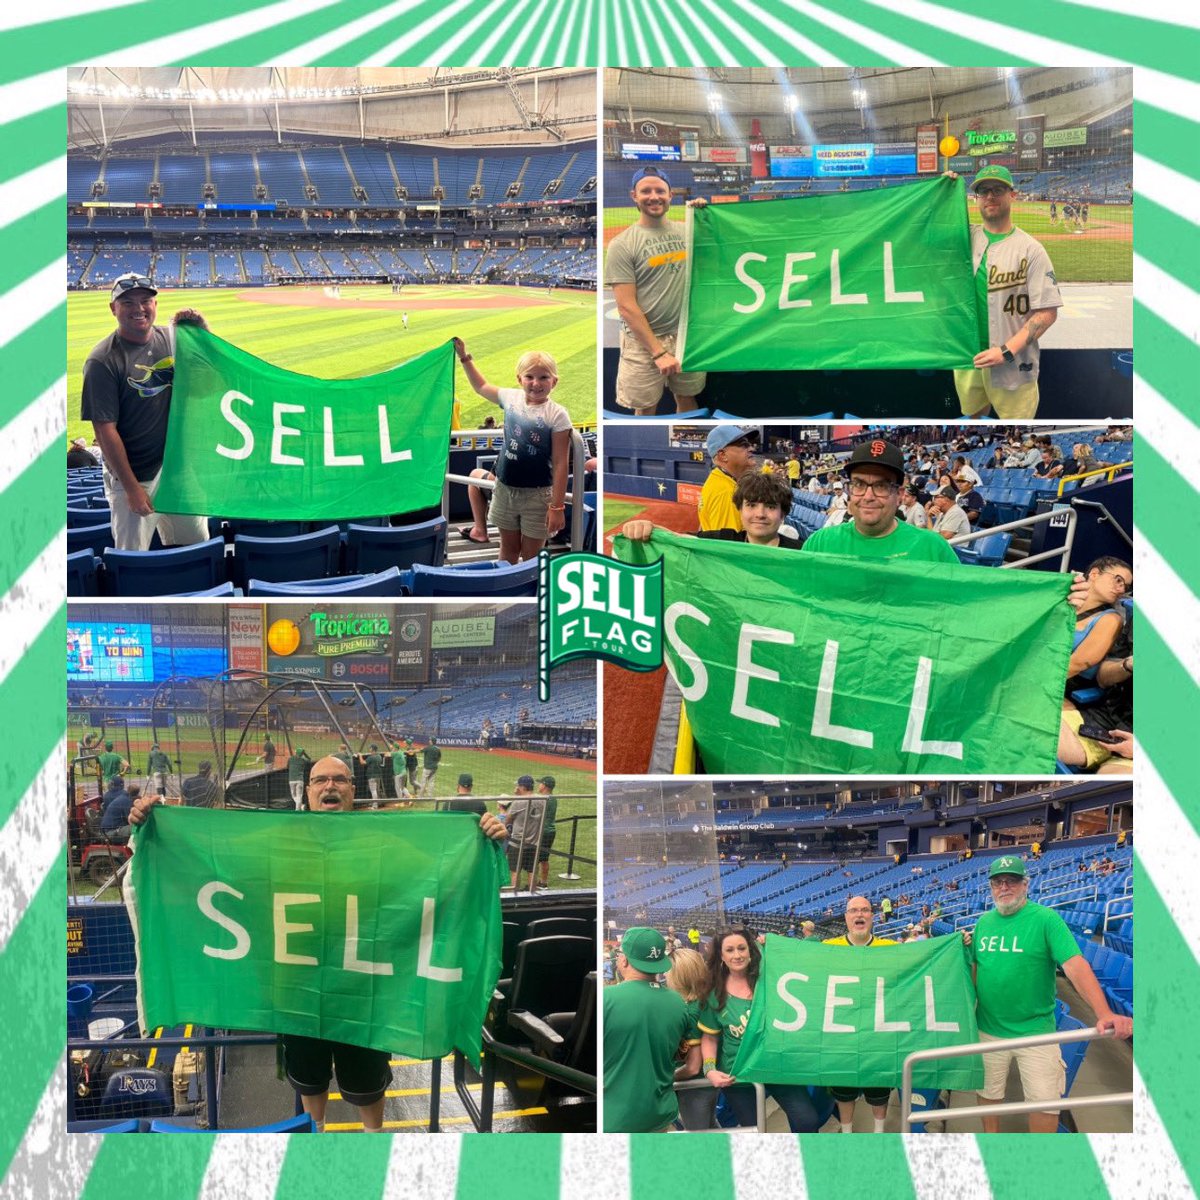 We tip our caps and send a big cheers to #RaysUp fans for showing solidarity with A’s fans in TB! 

Loved seeing all the shots from the #SELLFlagTour at the Trop! 

Can’t wait for ATL and SD to stand with us and against our POS owner! #FJF